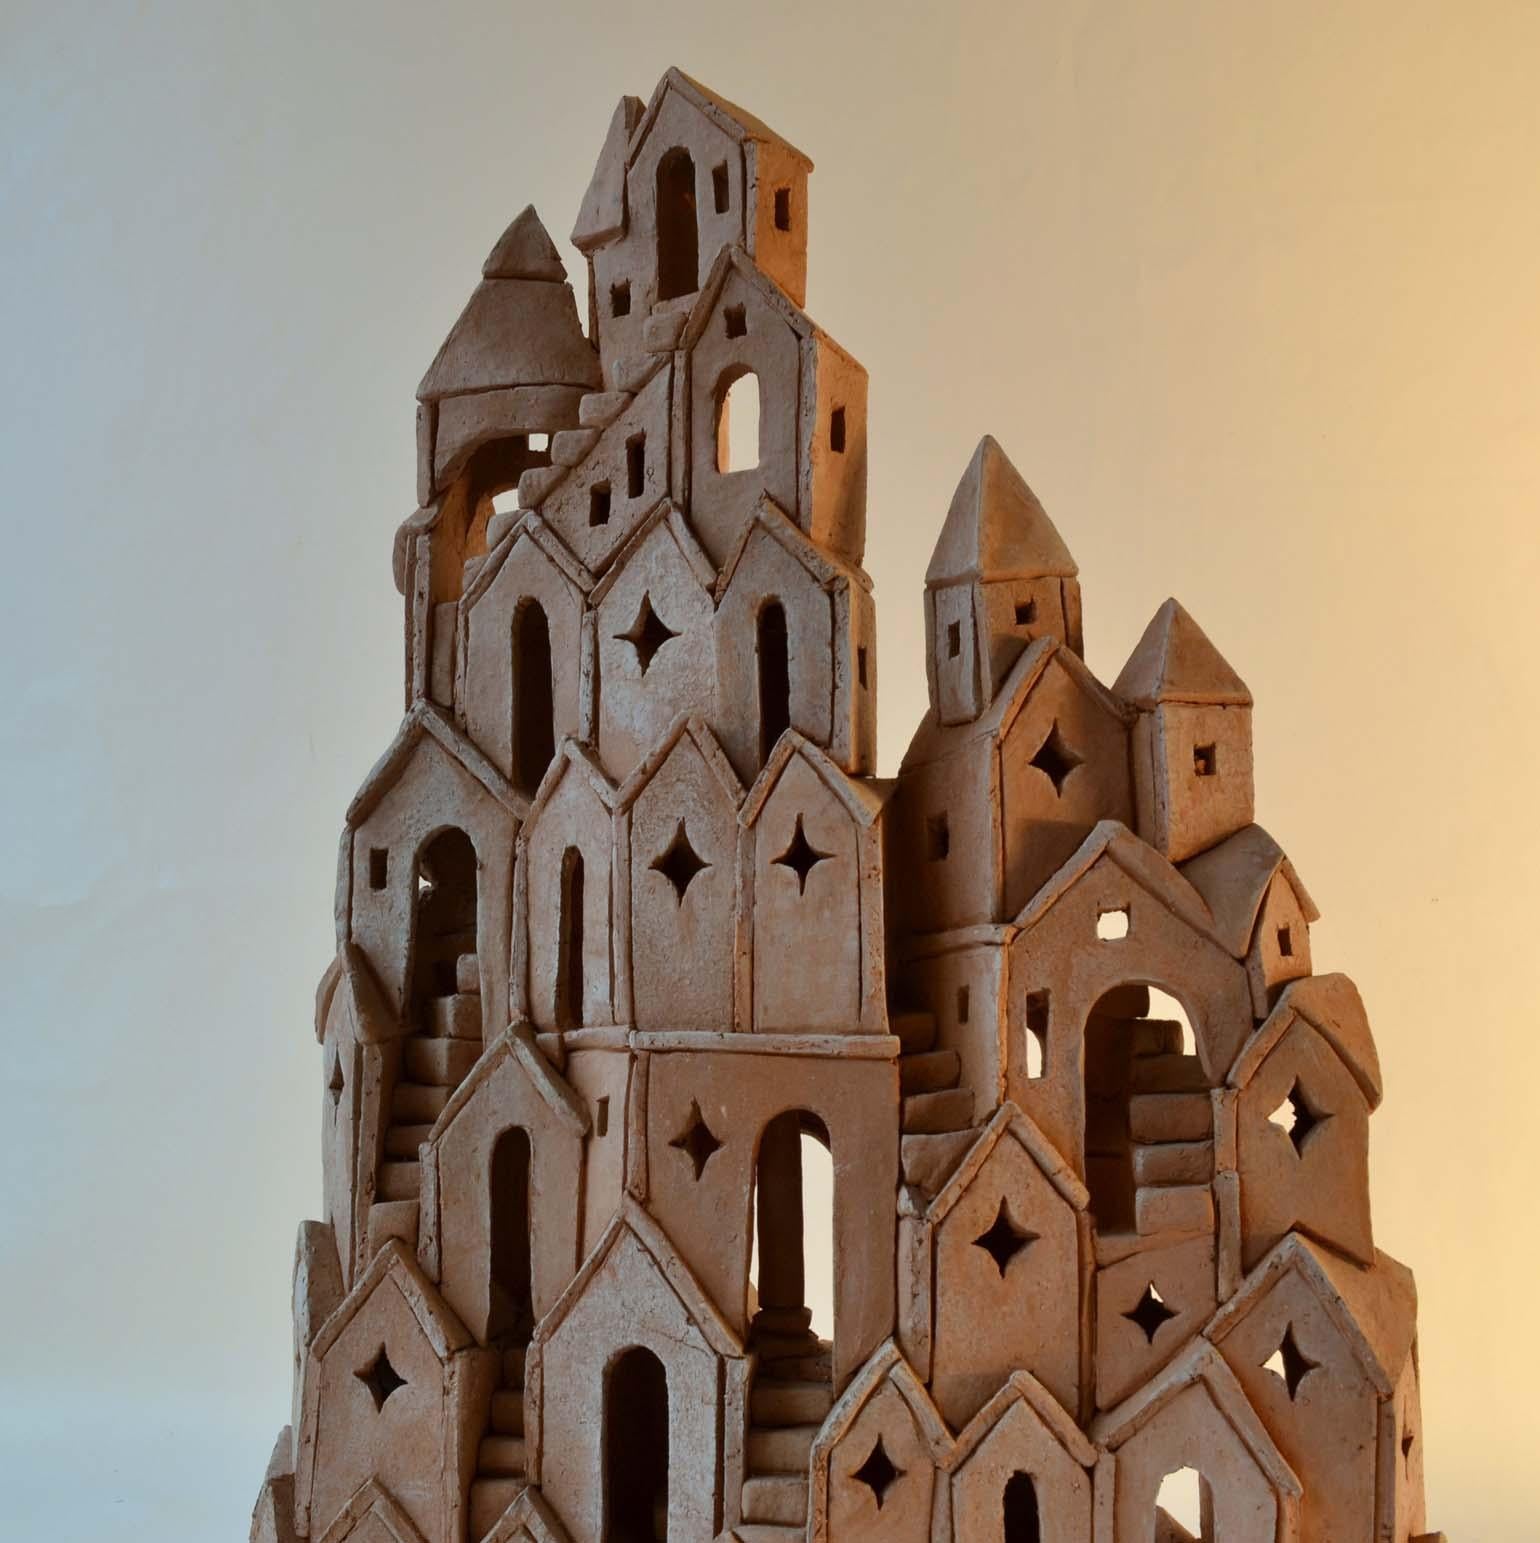 Architectural Surreal Ceramic Tower Sculpture 2 by Dutch Arie Bouter 1995 8